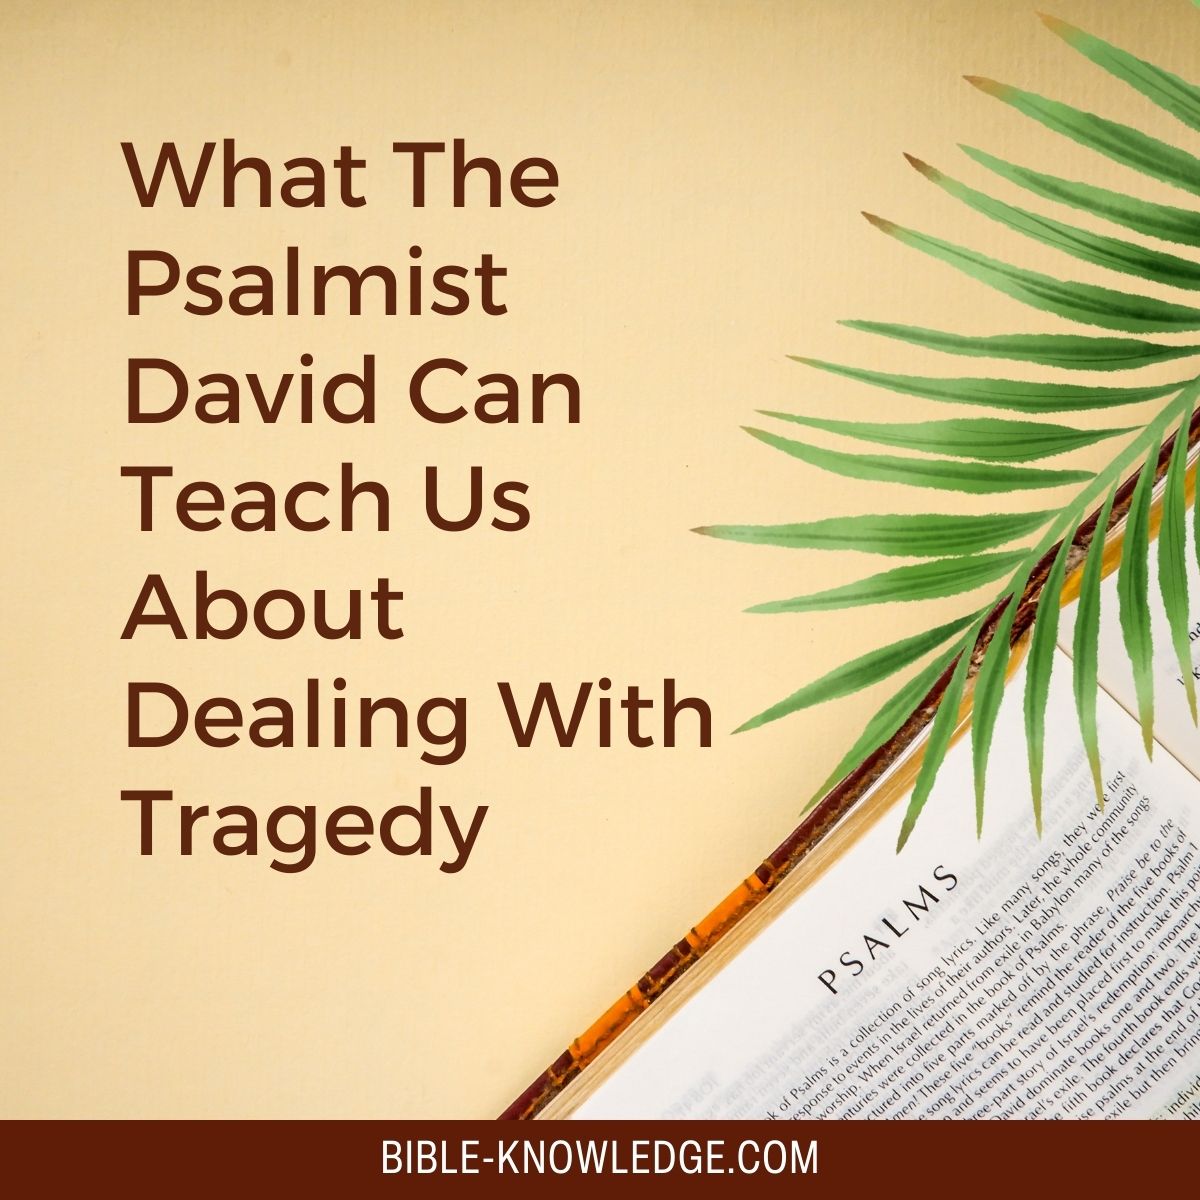 What The Psalmist David Can Teach Us About Dealing With Tragedy